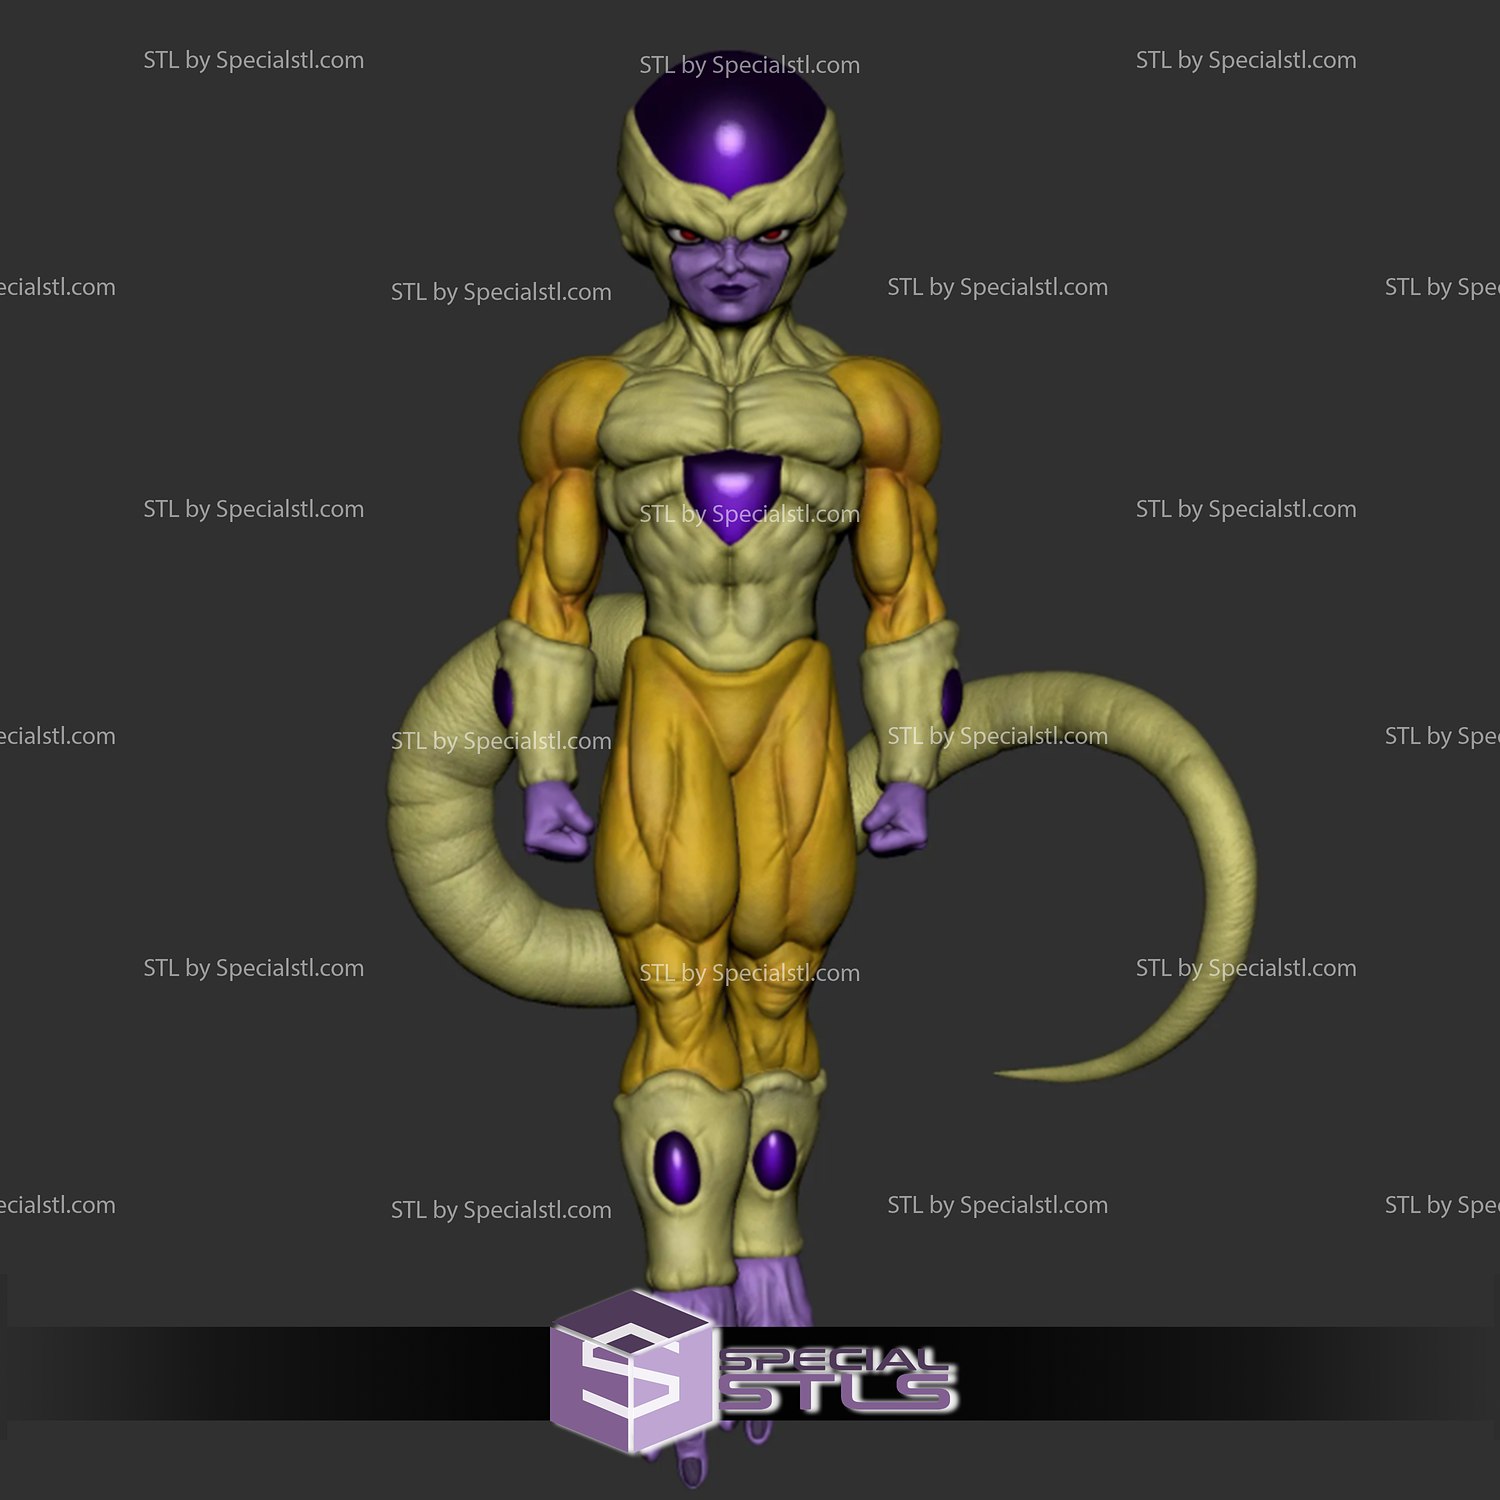 Golden Frieza from Dragon Ball